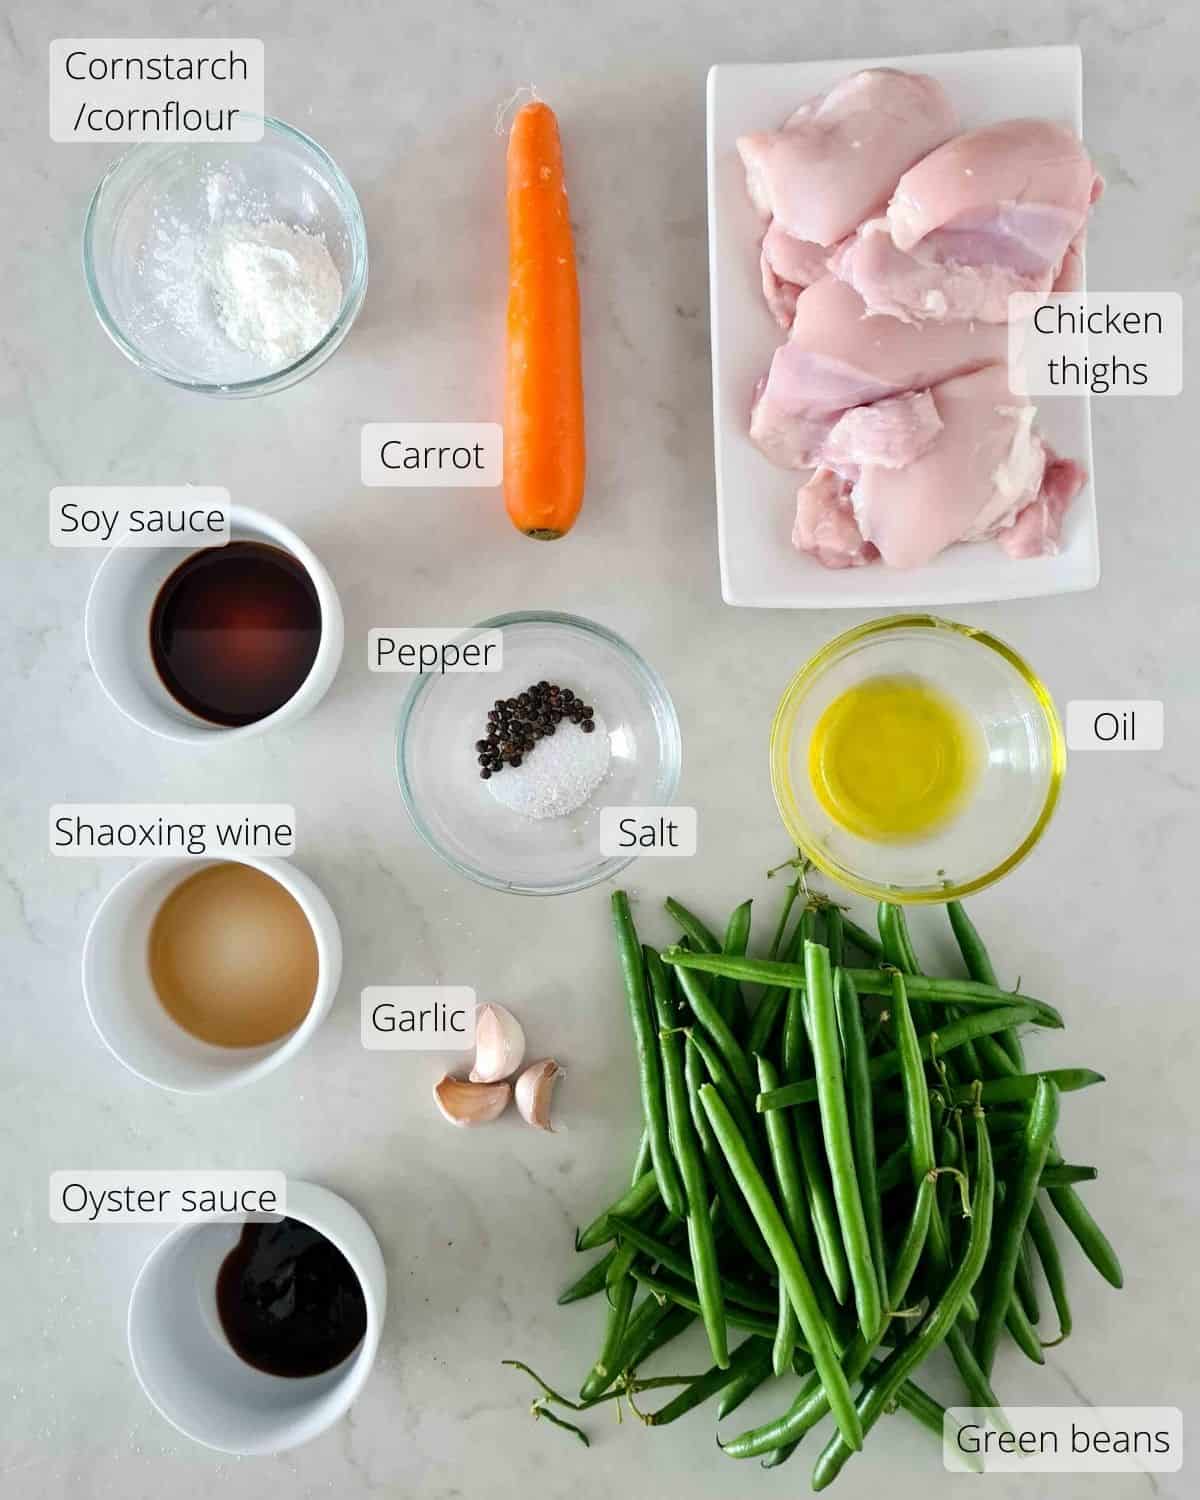 All ingredients required for this recipe